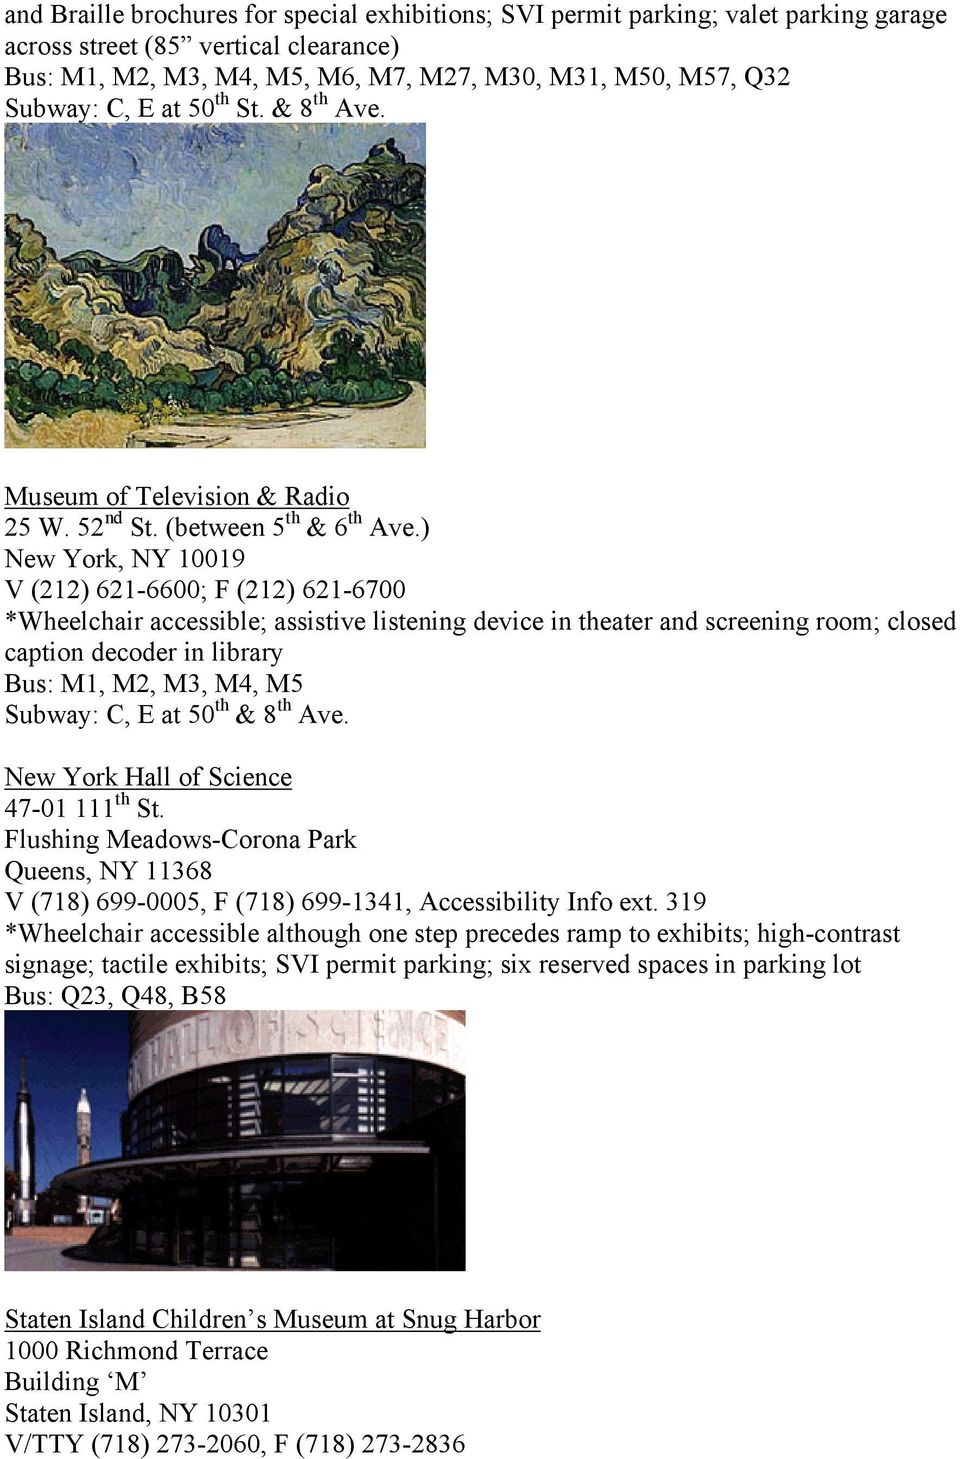 ) New York, NY 10019 V (212) 621-6600; F (212) 621-6700 *Wheelchair accessible; assistive listening device in theater and screening room; closed caption decoder in library Bus: M1, M2, M3, M4, M5